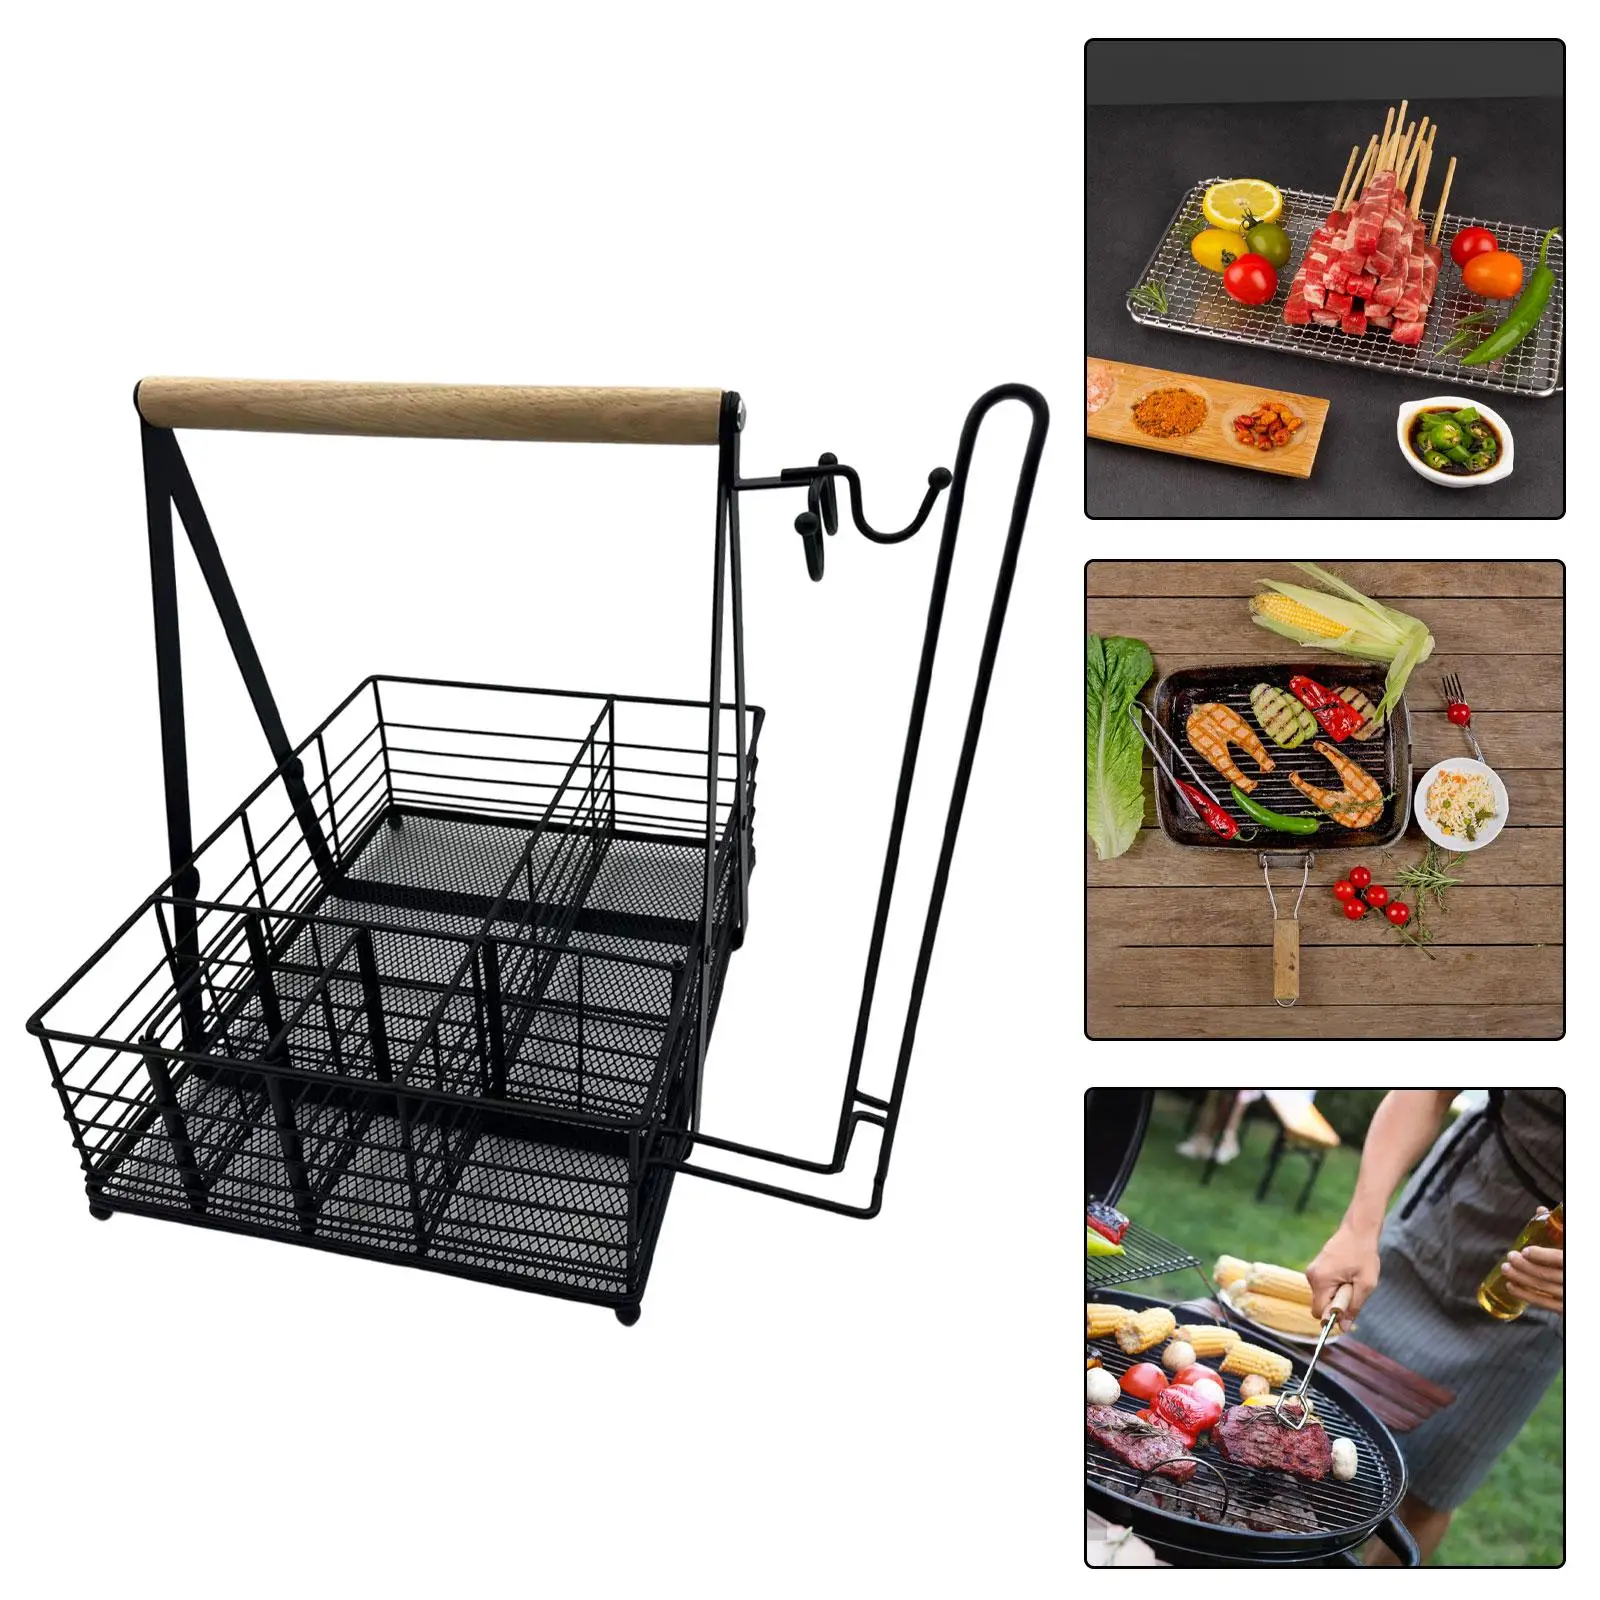 BBQ Grilling Caddy with Paper Towel Holder Easily Install Sturdy with 6 Compartments for Storing Condiments, Plates, Tableware